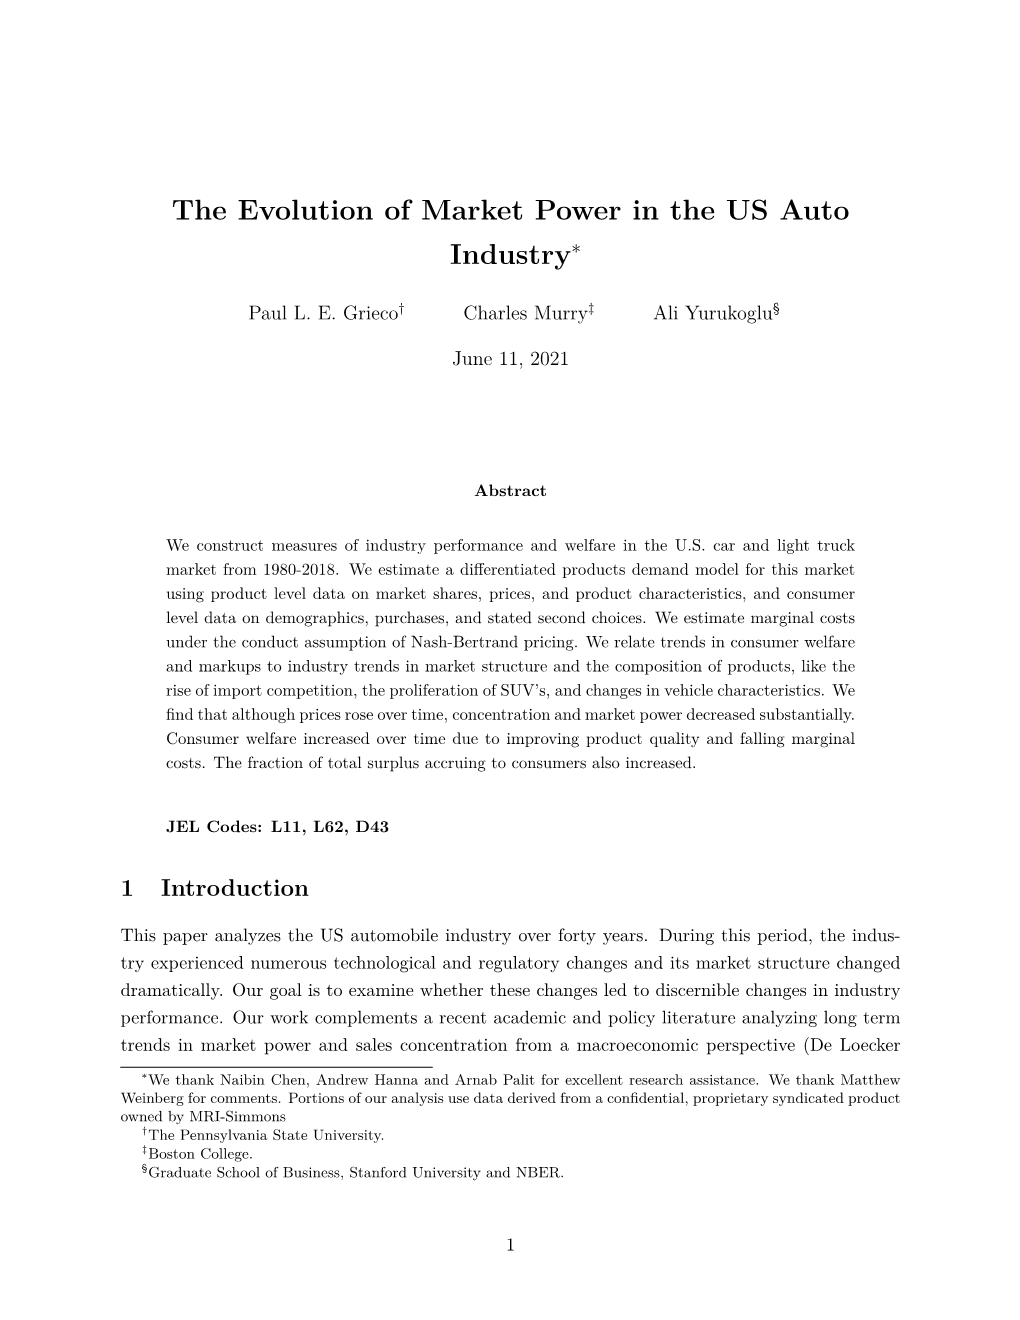 The Evolution of Market Power in the US Auto Industry∗